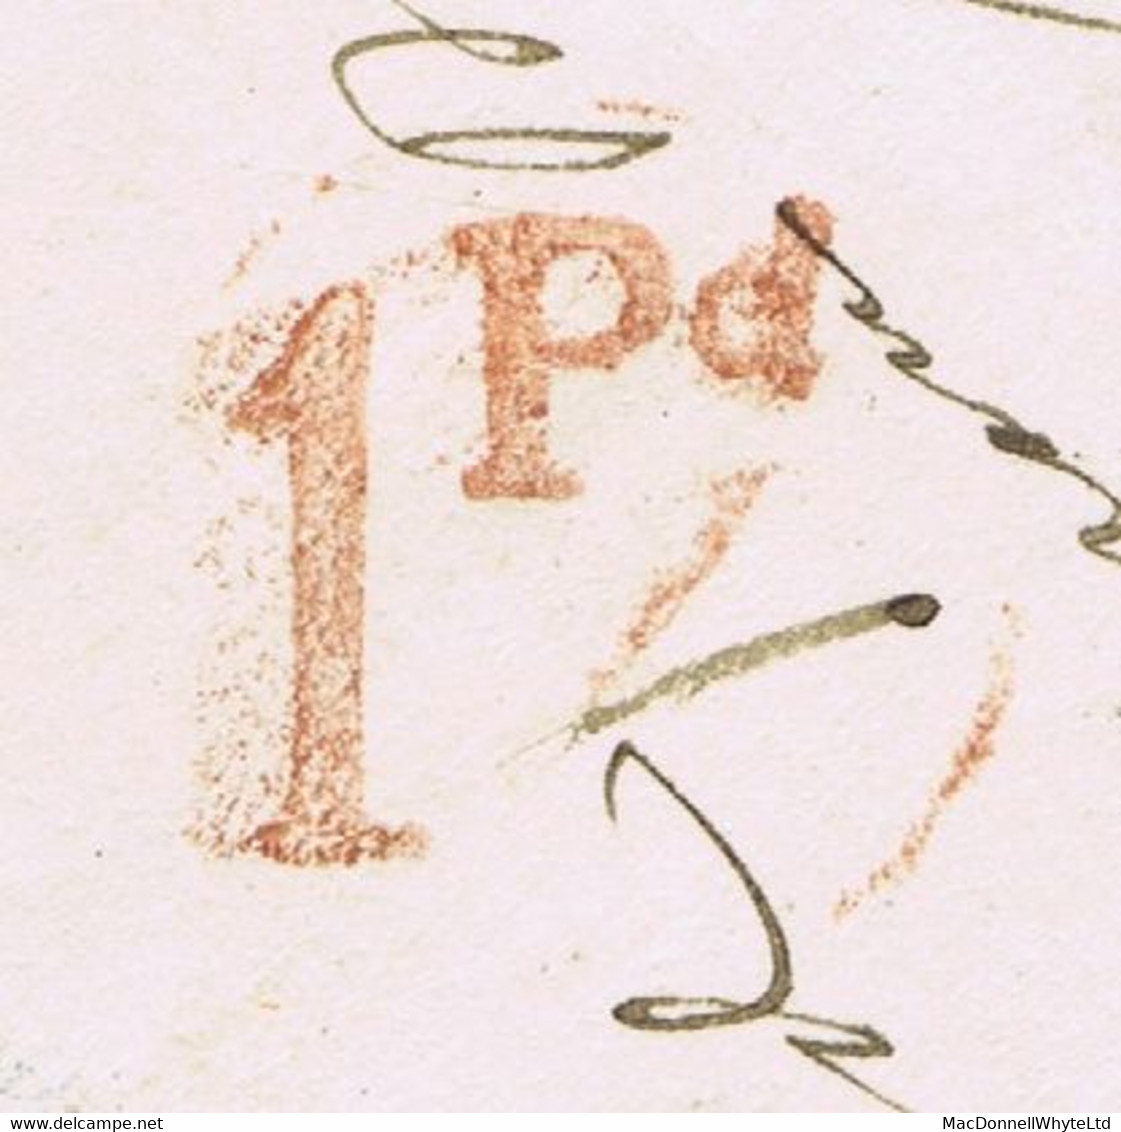 Ireland Louth Uniform Penny Post 1849 Distinctive Dundalk "1Pd" UPP Hs In Red On Cover To Drogheda, DUNDALK AU 25 1849 - Prephilately